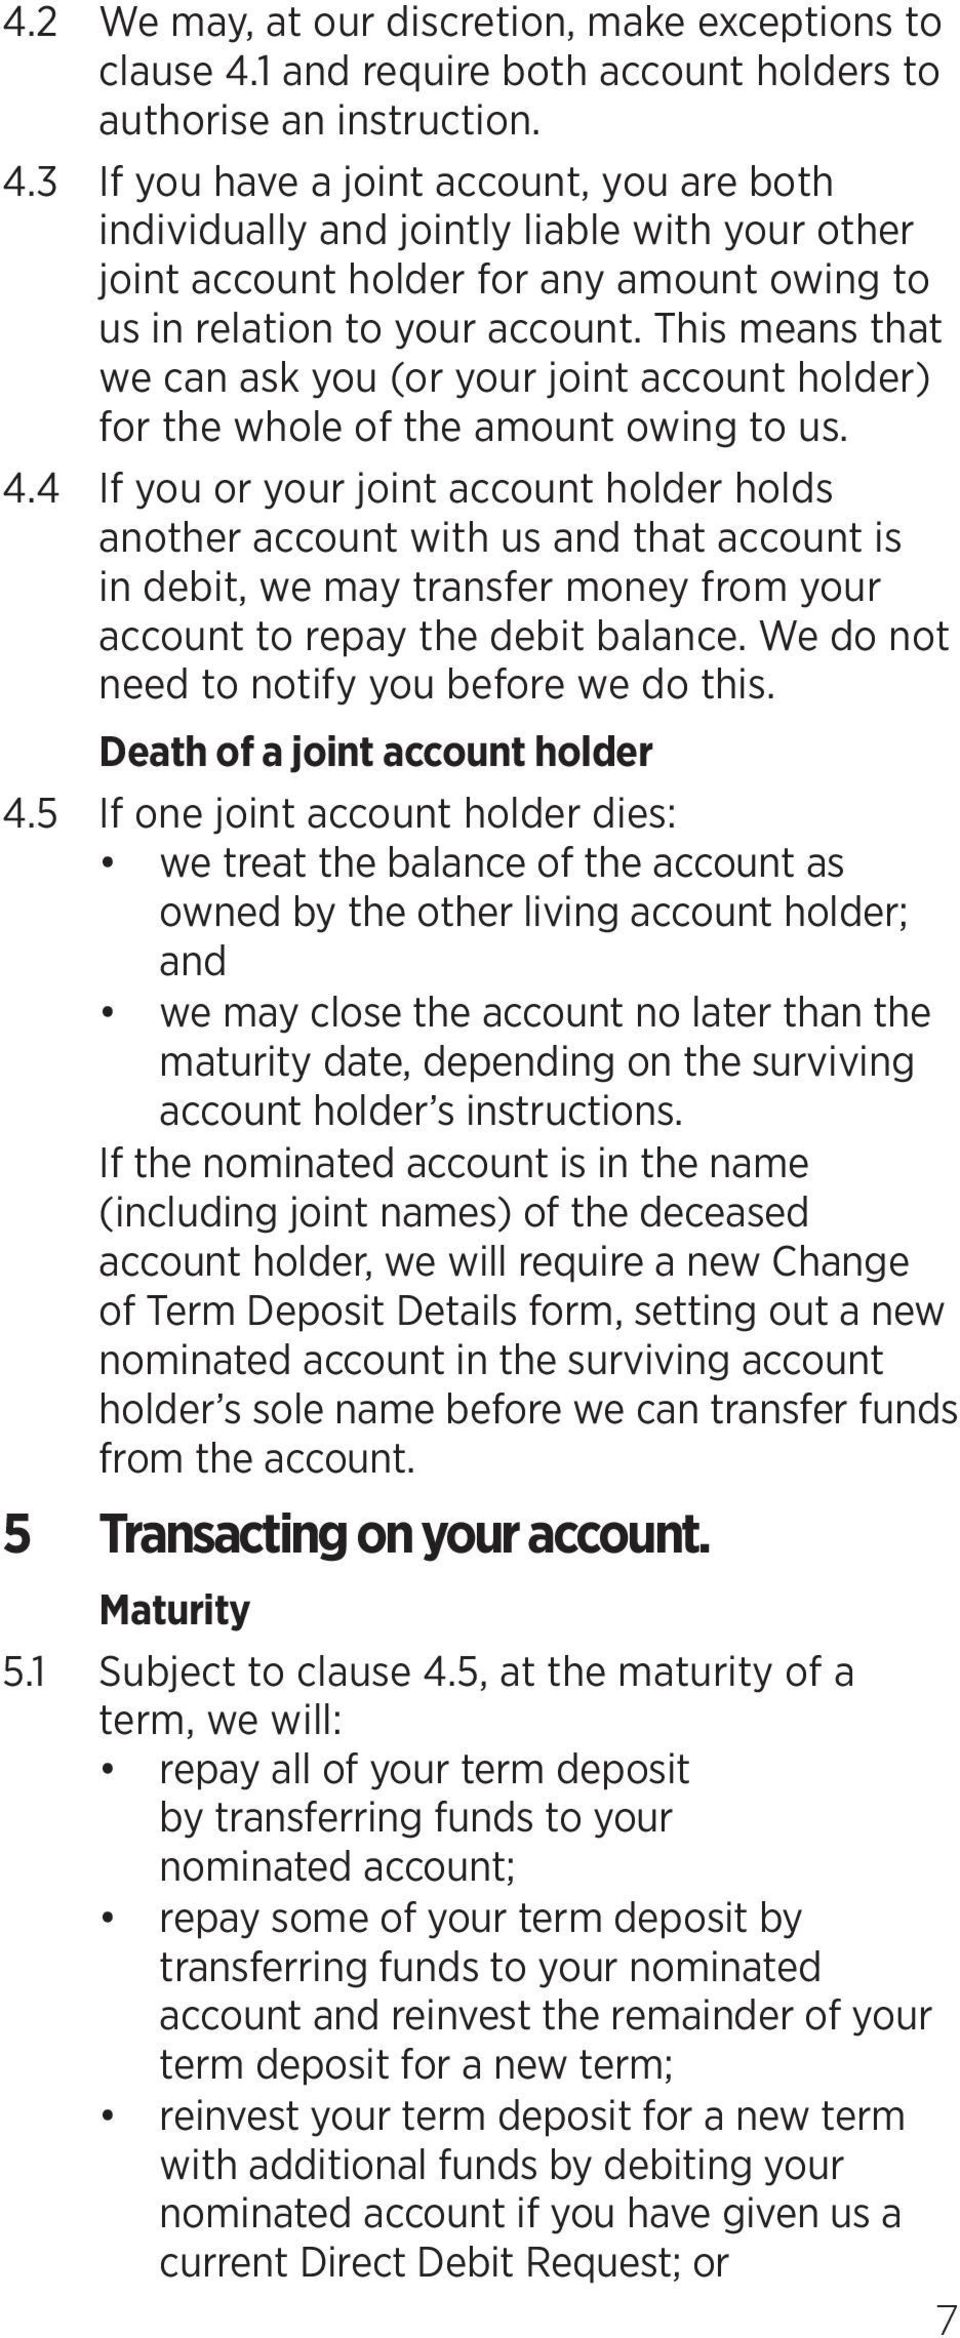 3 If you have a joint account, you are both individually and jointly liable with your other joint account holder for any amount owing to us in relation to your account.